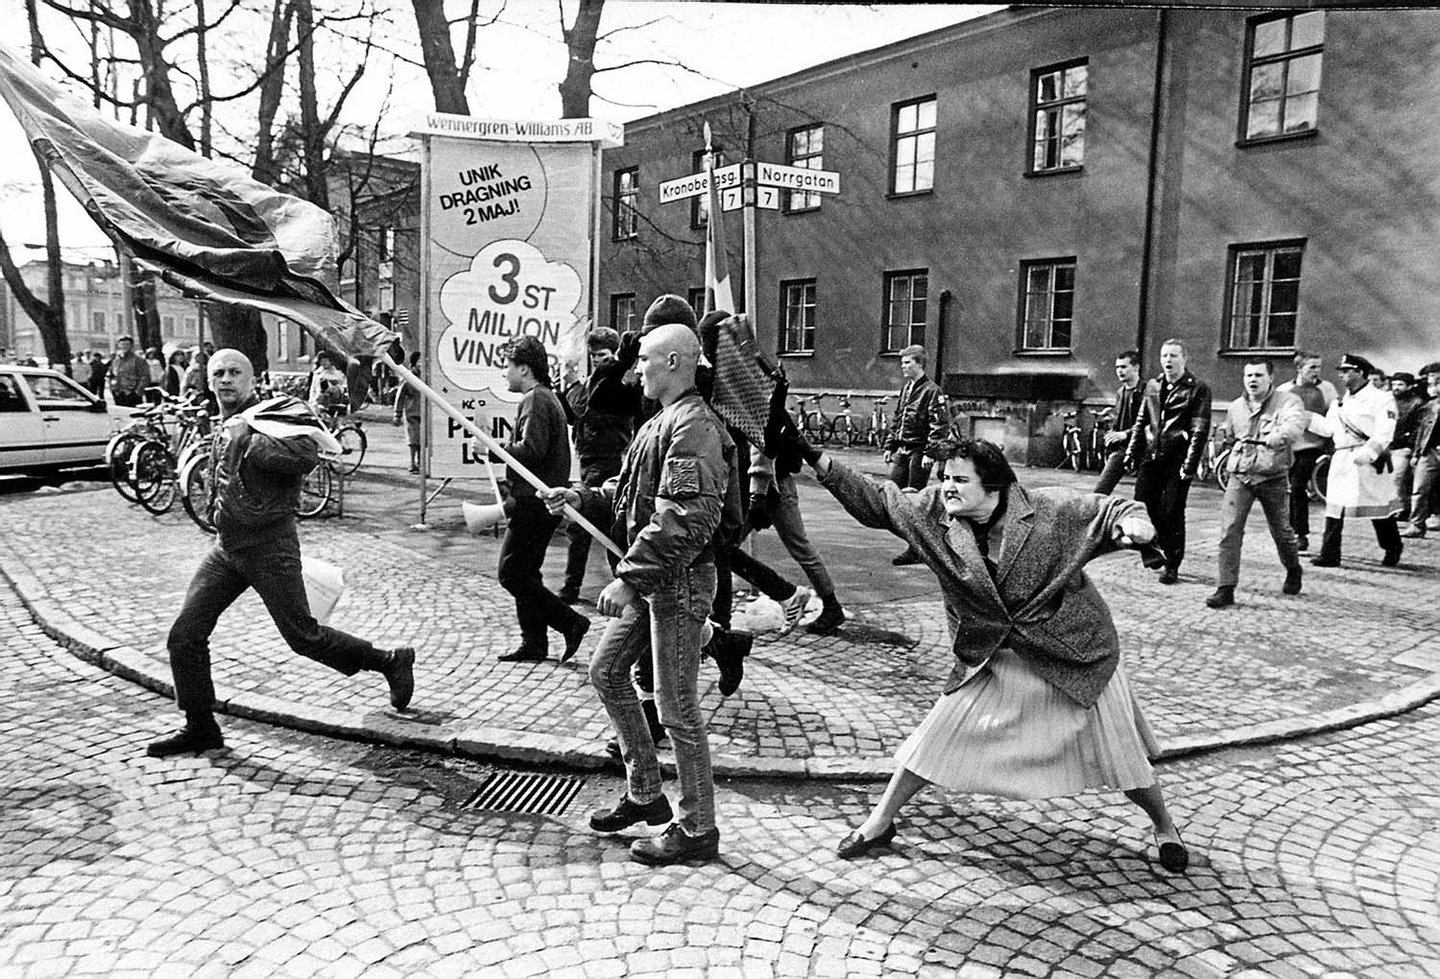 A woman hitting a neo-Nazi with her handbag, Sweden, 1985 - Hans Runesson